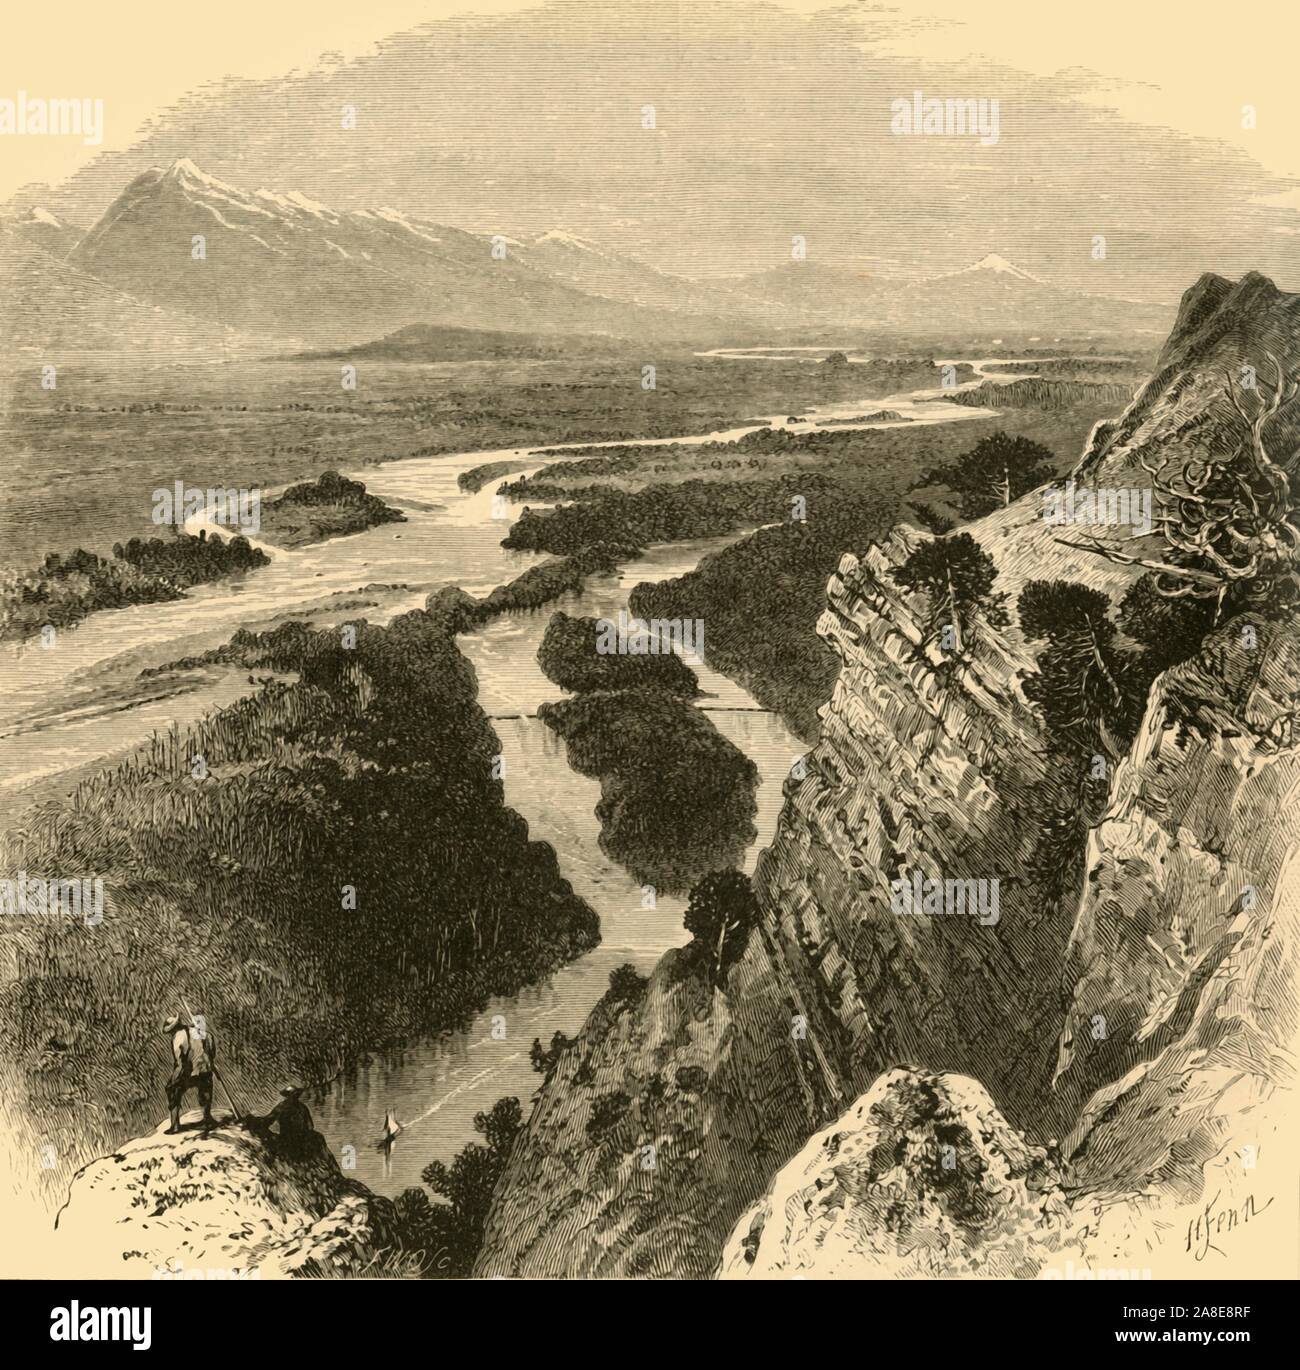 'The Yellowstone', 1872. View of the Yellowstone River, a tributary of the Missouri River, in the western USA. The river flows from the Rocky Mountains into southern Montana and northern Wyoming. From &quot;Picturesque America; or, The Land We Live In, A Delineation by Pen and Pencil of the Mountains, Rivers, Lakes...with Illustrations on Steel and Wood by Eminent American Artists&quot; Vol. I, edited by William Cullen Bryant. [D. Appleton and Company, New York, 1872] Stock Photo